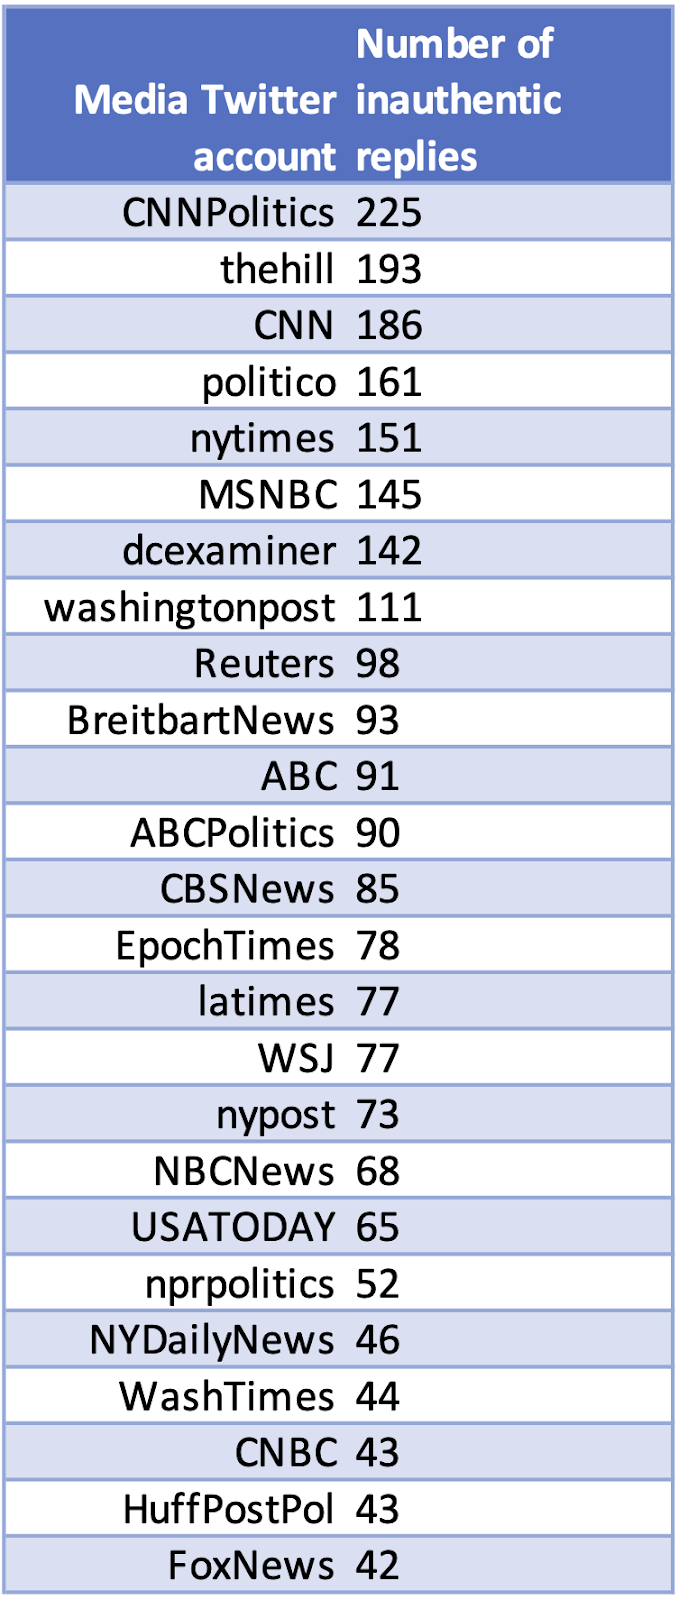 Evidence of a coordinated network amplifying inauthentic narratives in the 2020 US election